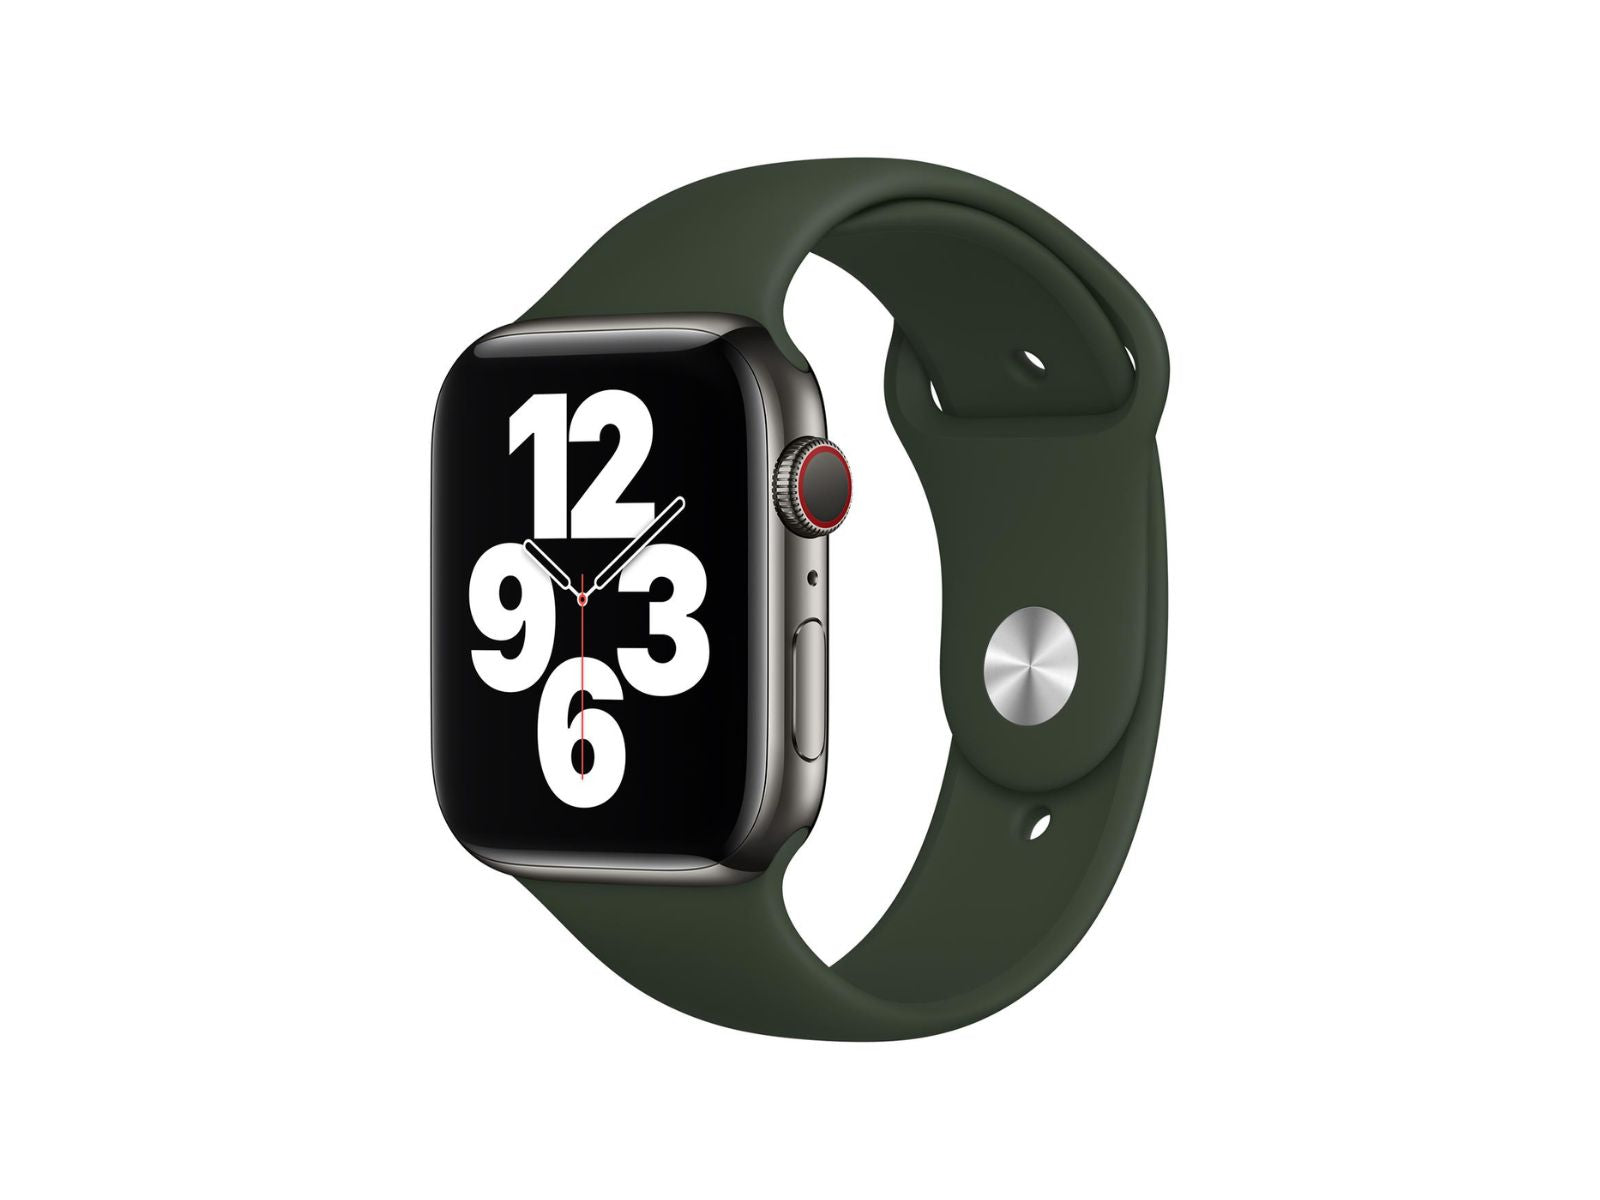 Image shows an angled view of the green Apple Watch Strap on a watch